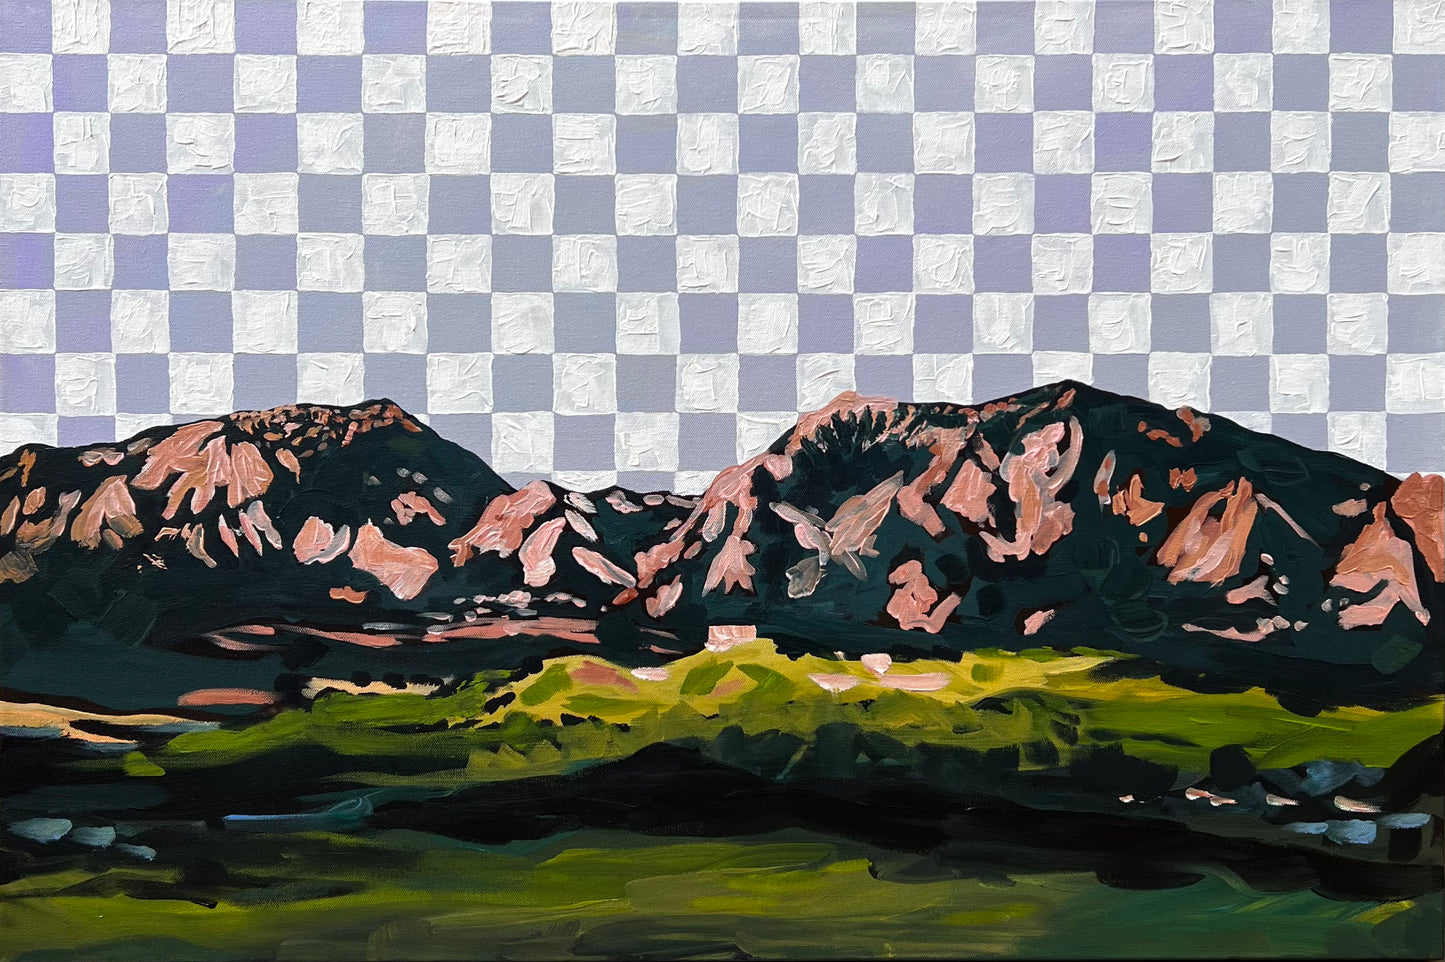 “Checking Out Boulder” 2023 Checkerboard Rockies series